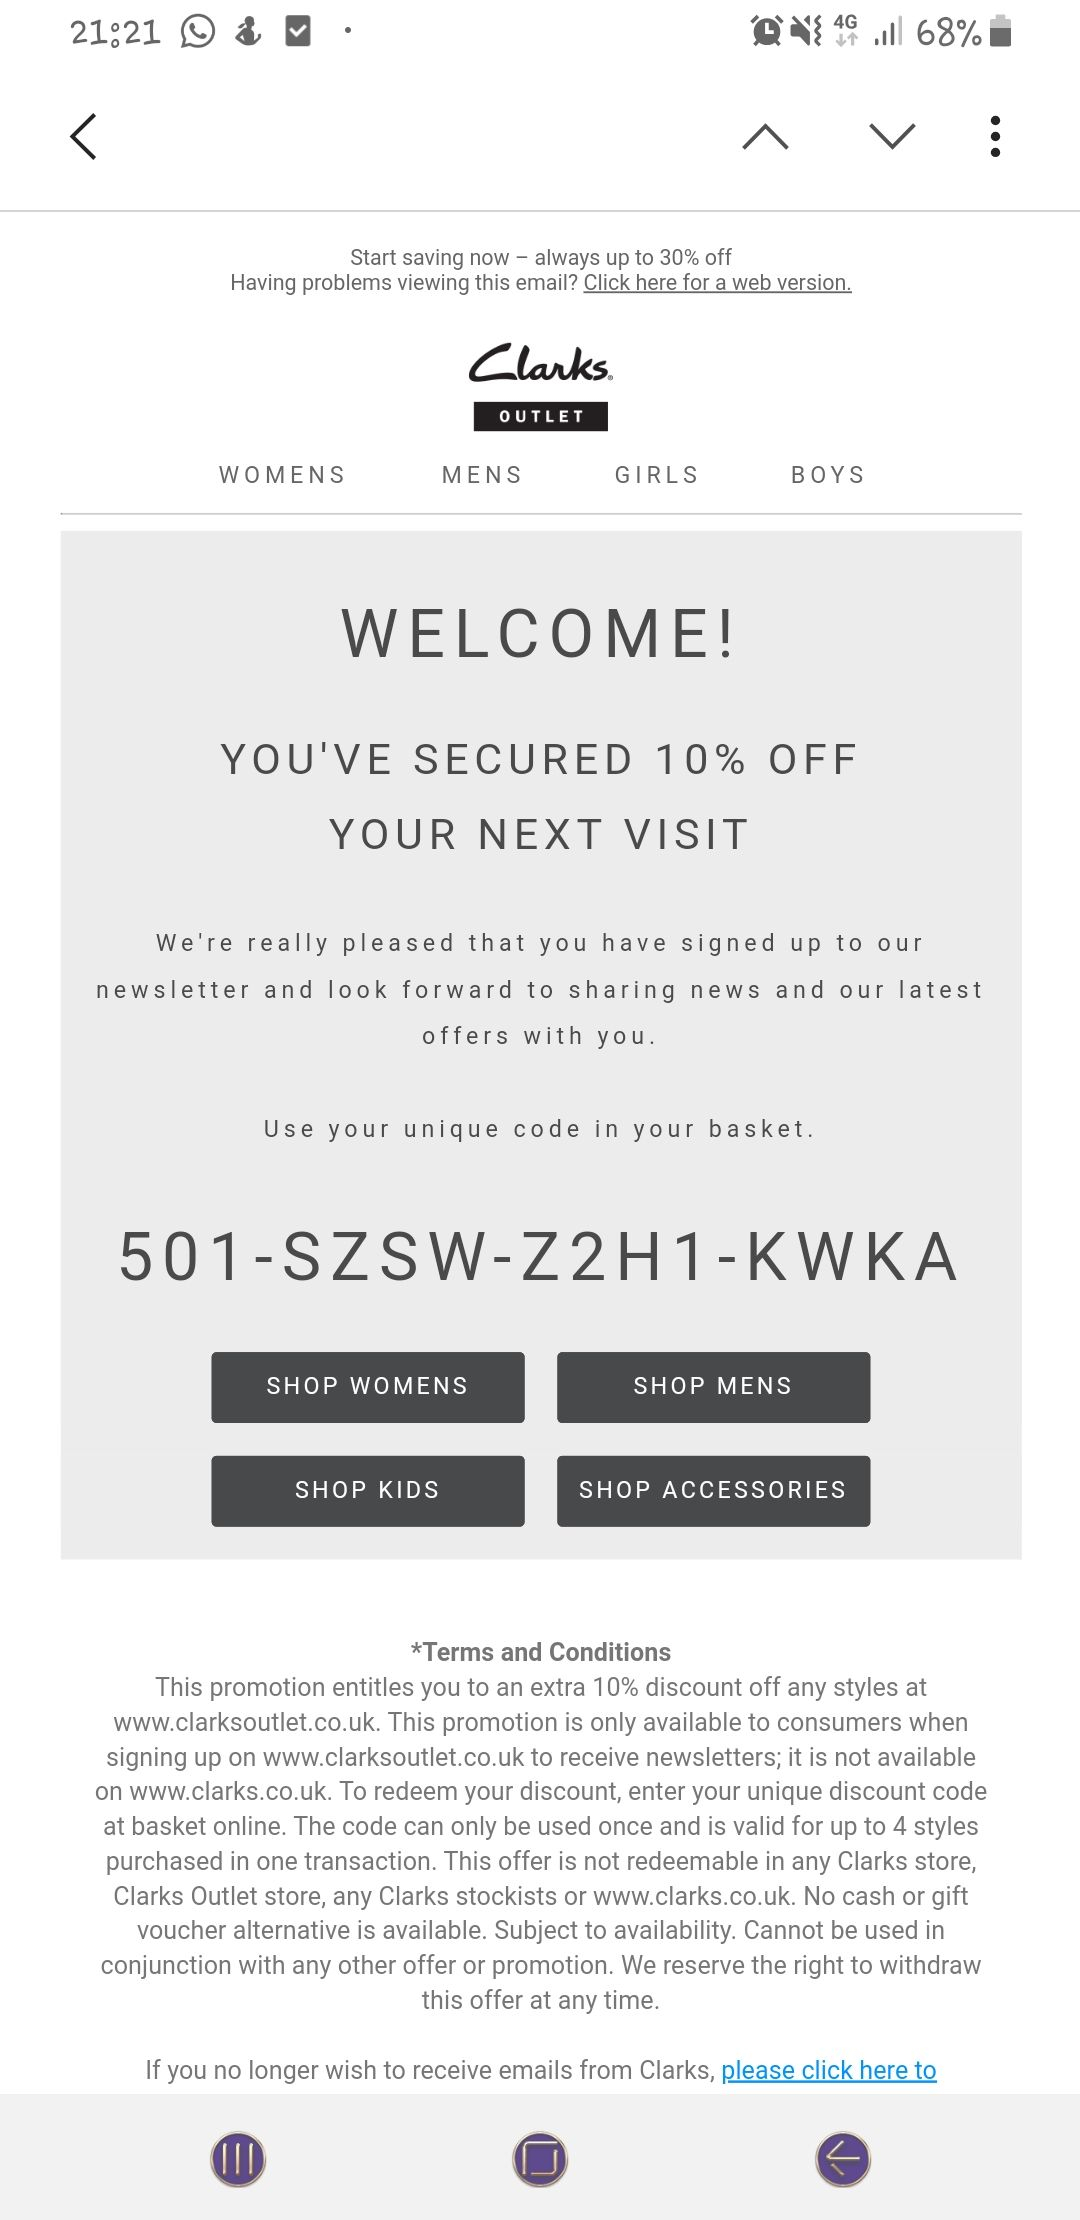 clarks outlet promo code 2018